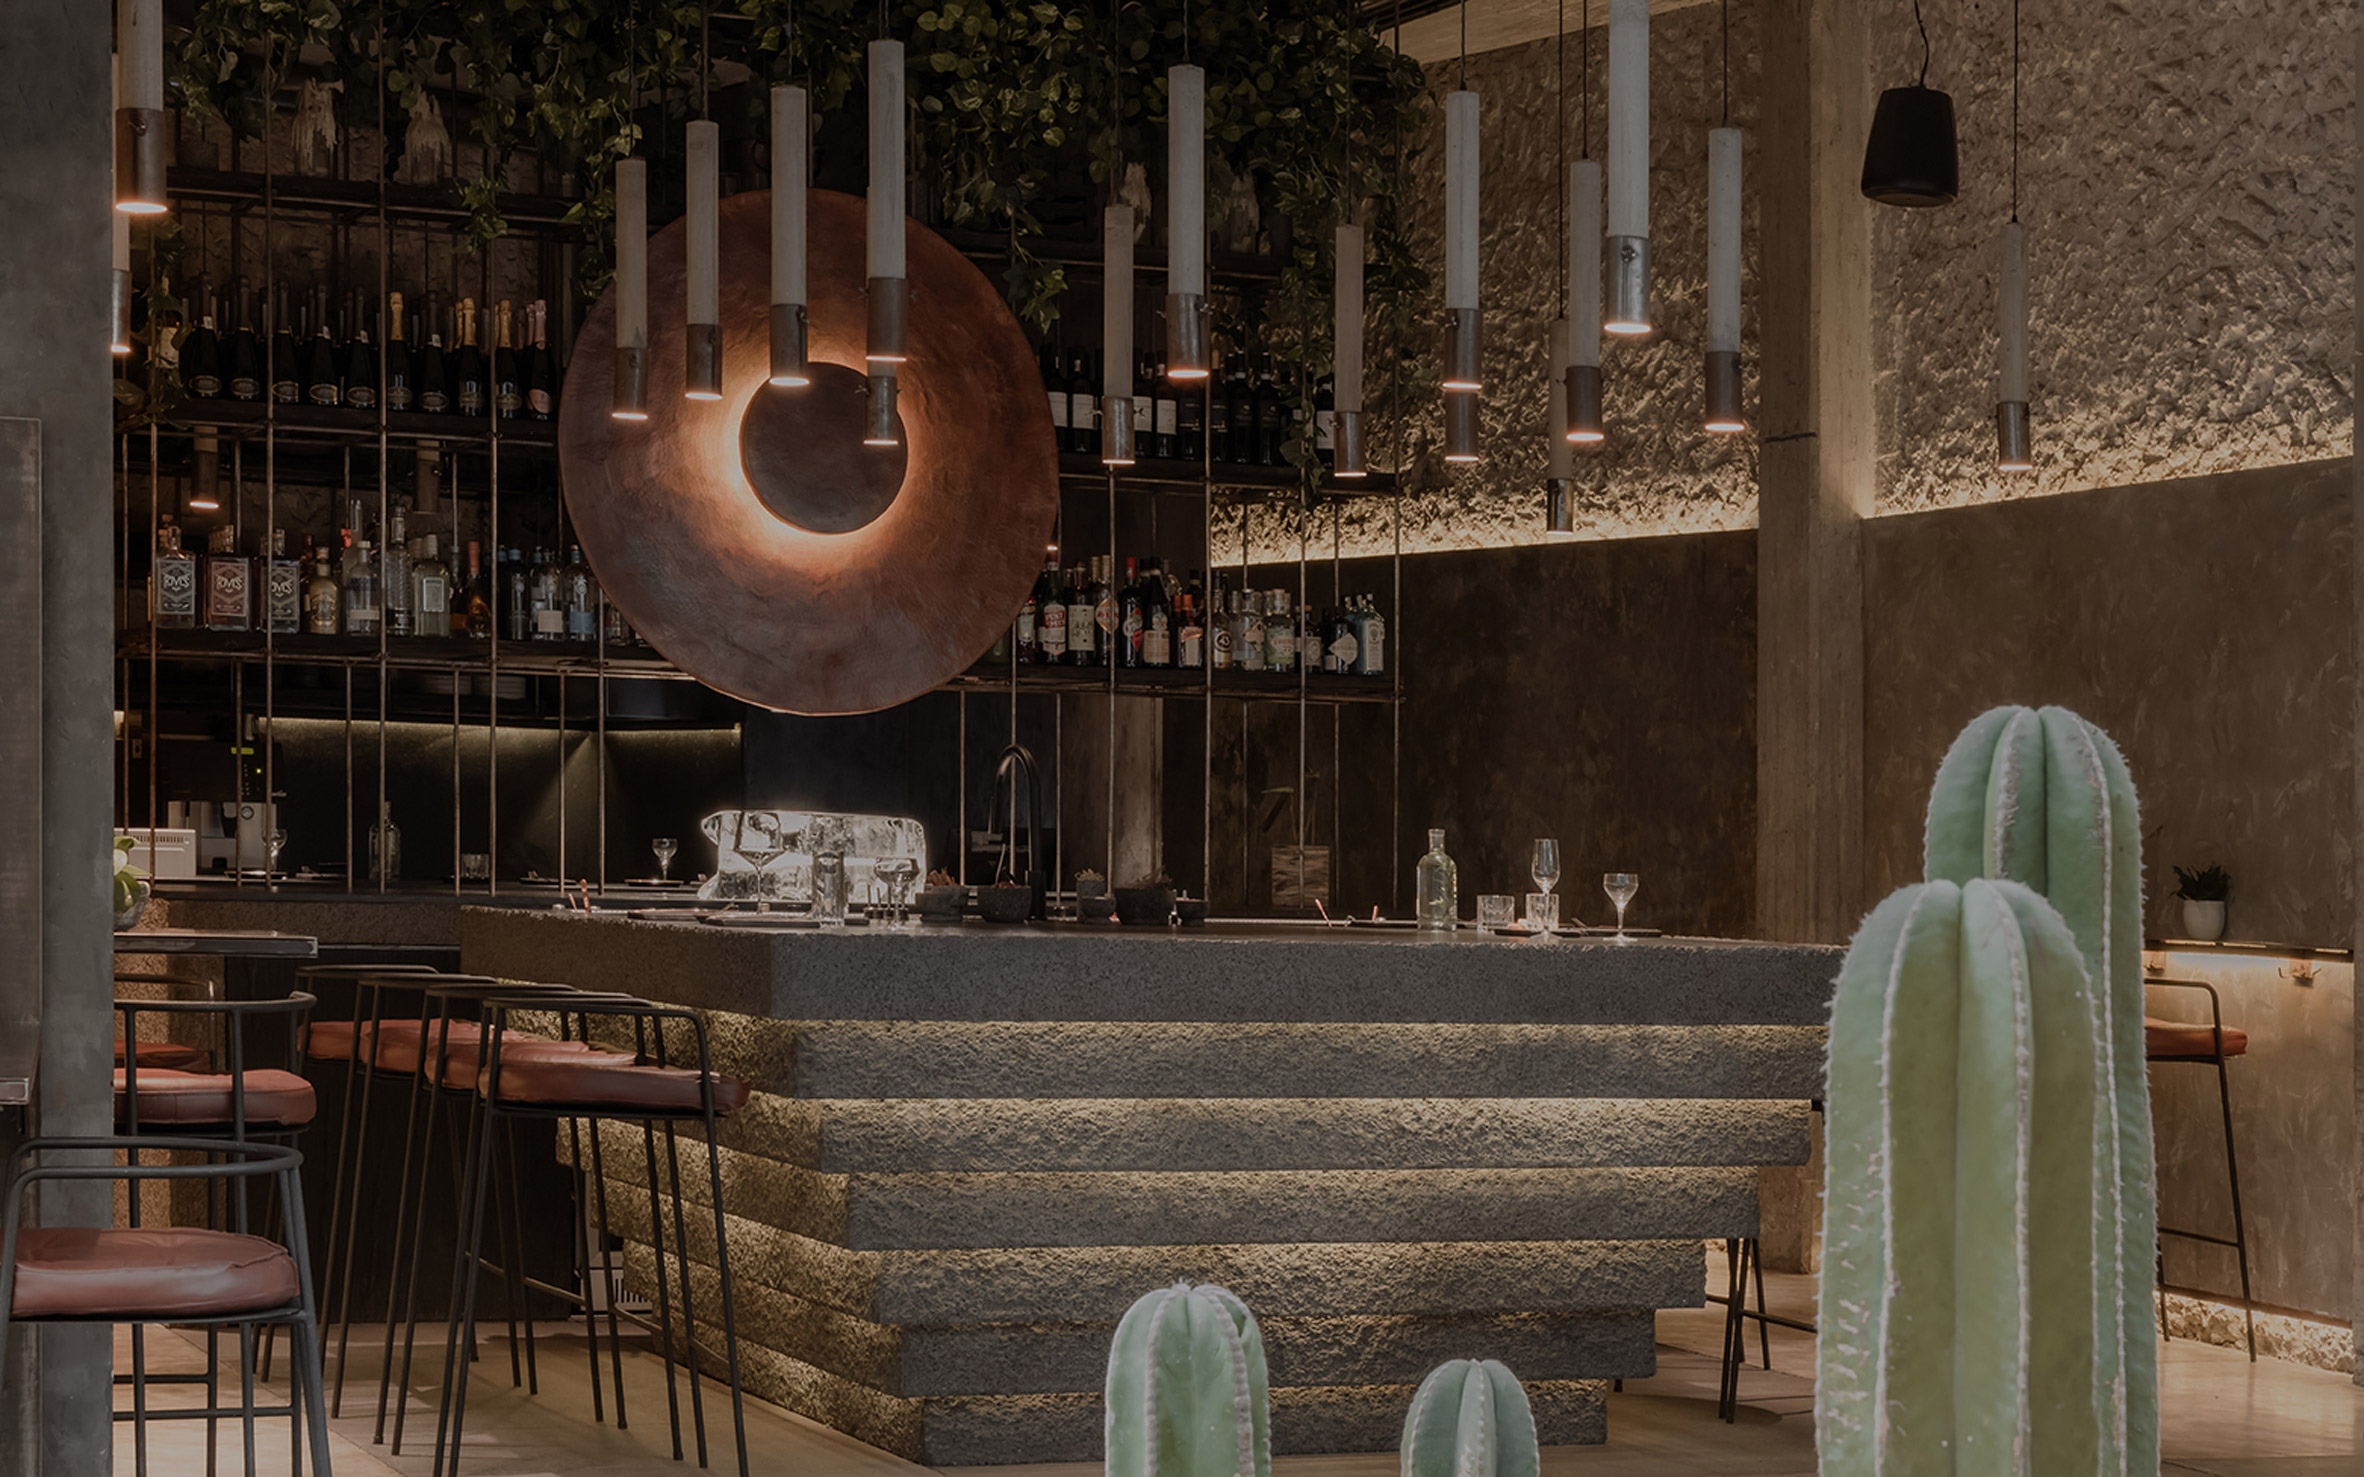 Tapas restaurant with concrete walls and central bar counter